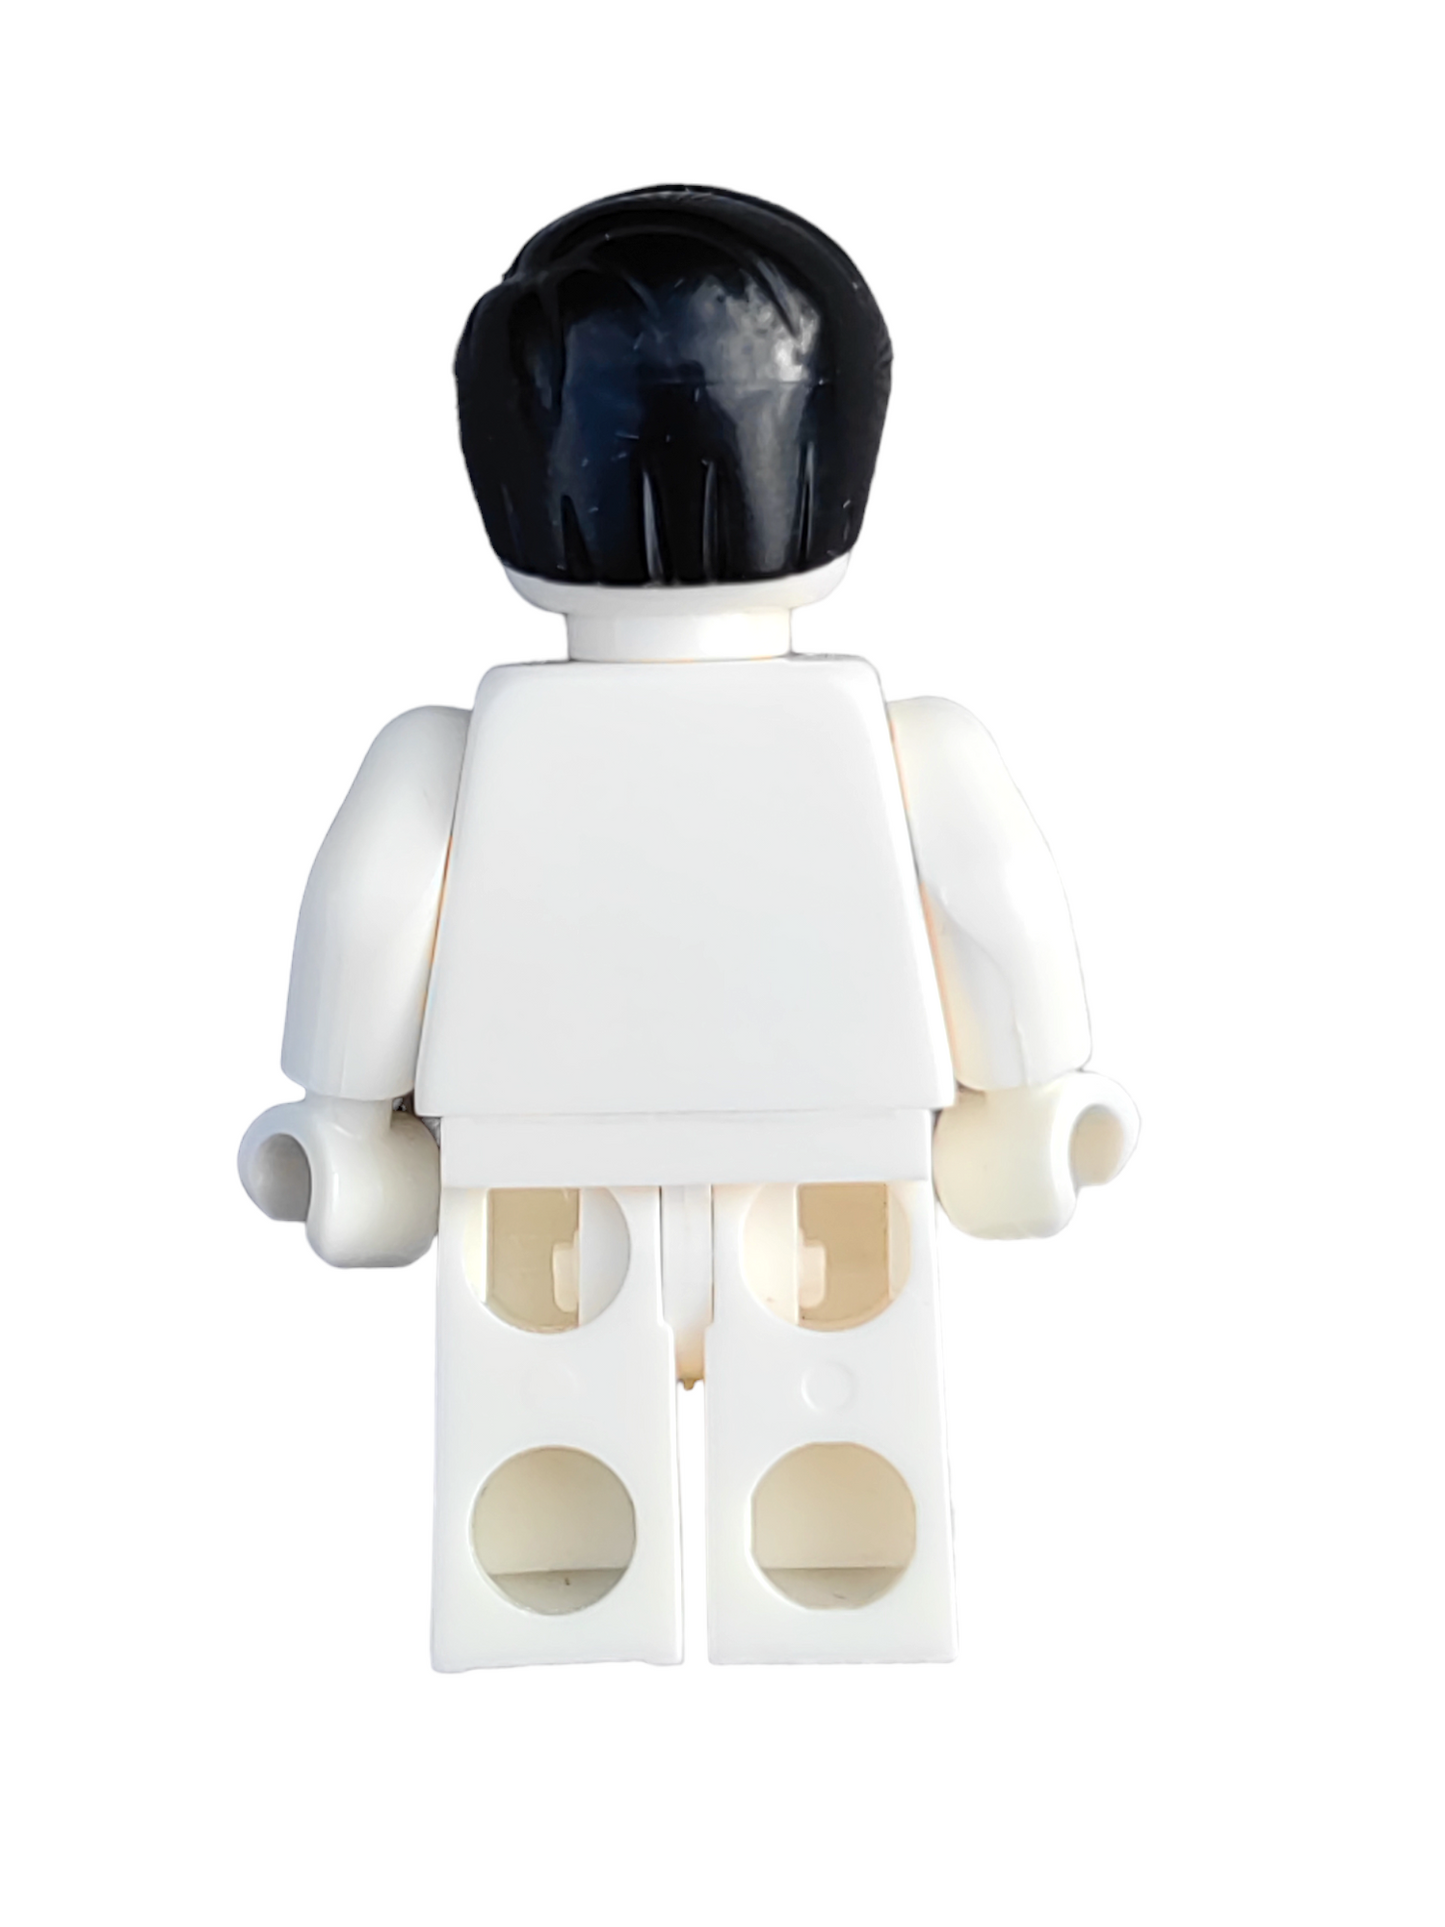 LEGO Wig, Black Hair Short Combed to the Side - UB1339